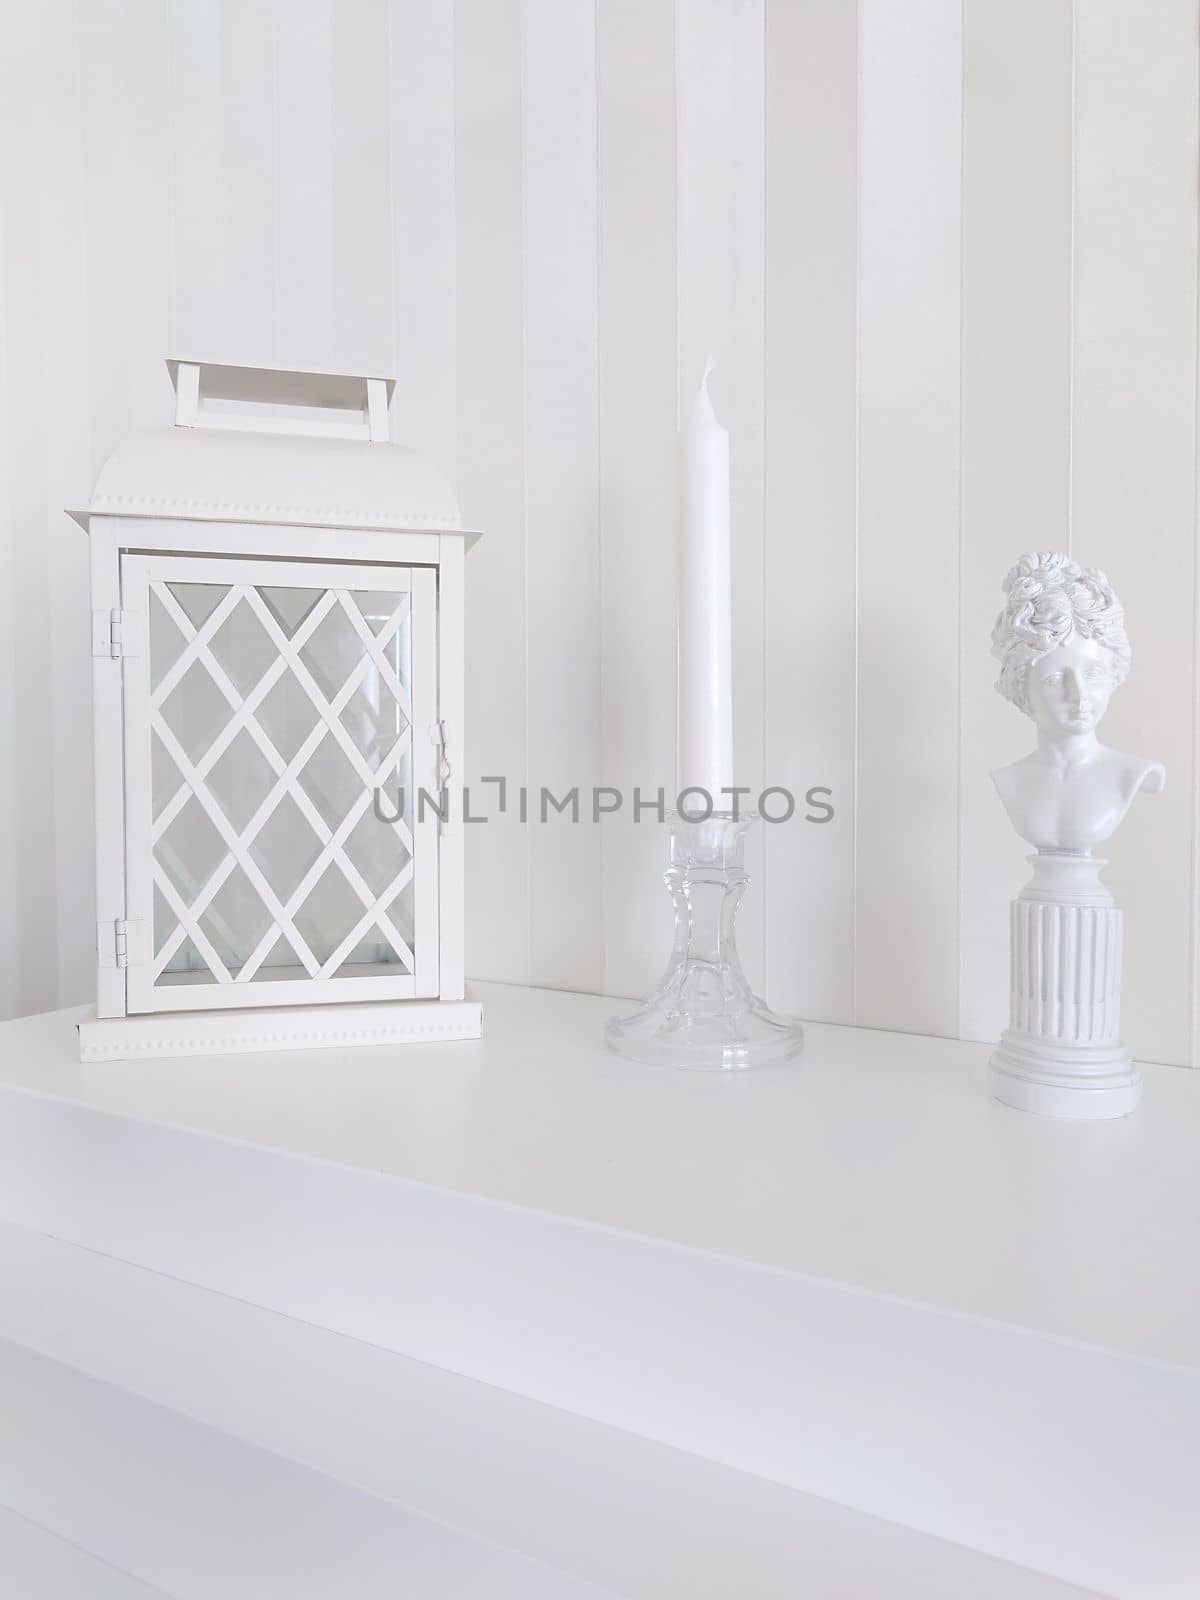 Texture or background. On the fireplace there is a lantern with a candlestick and a statuette of a woman from a long time ago